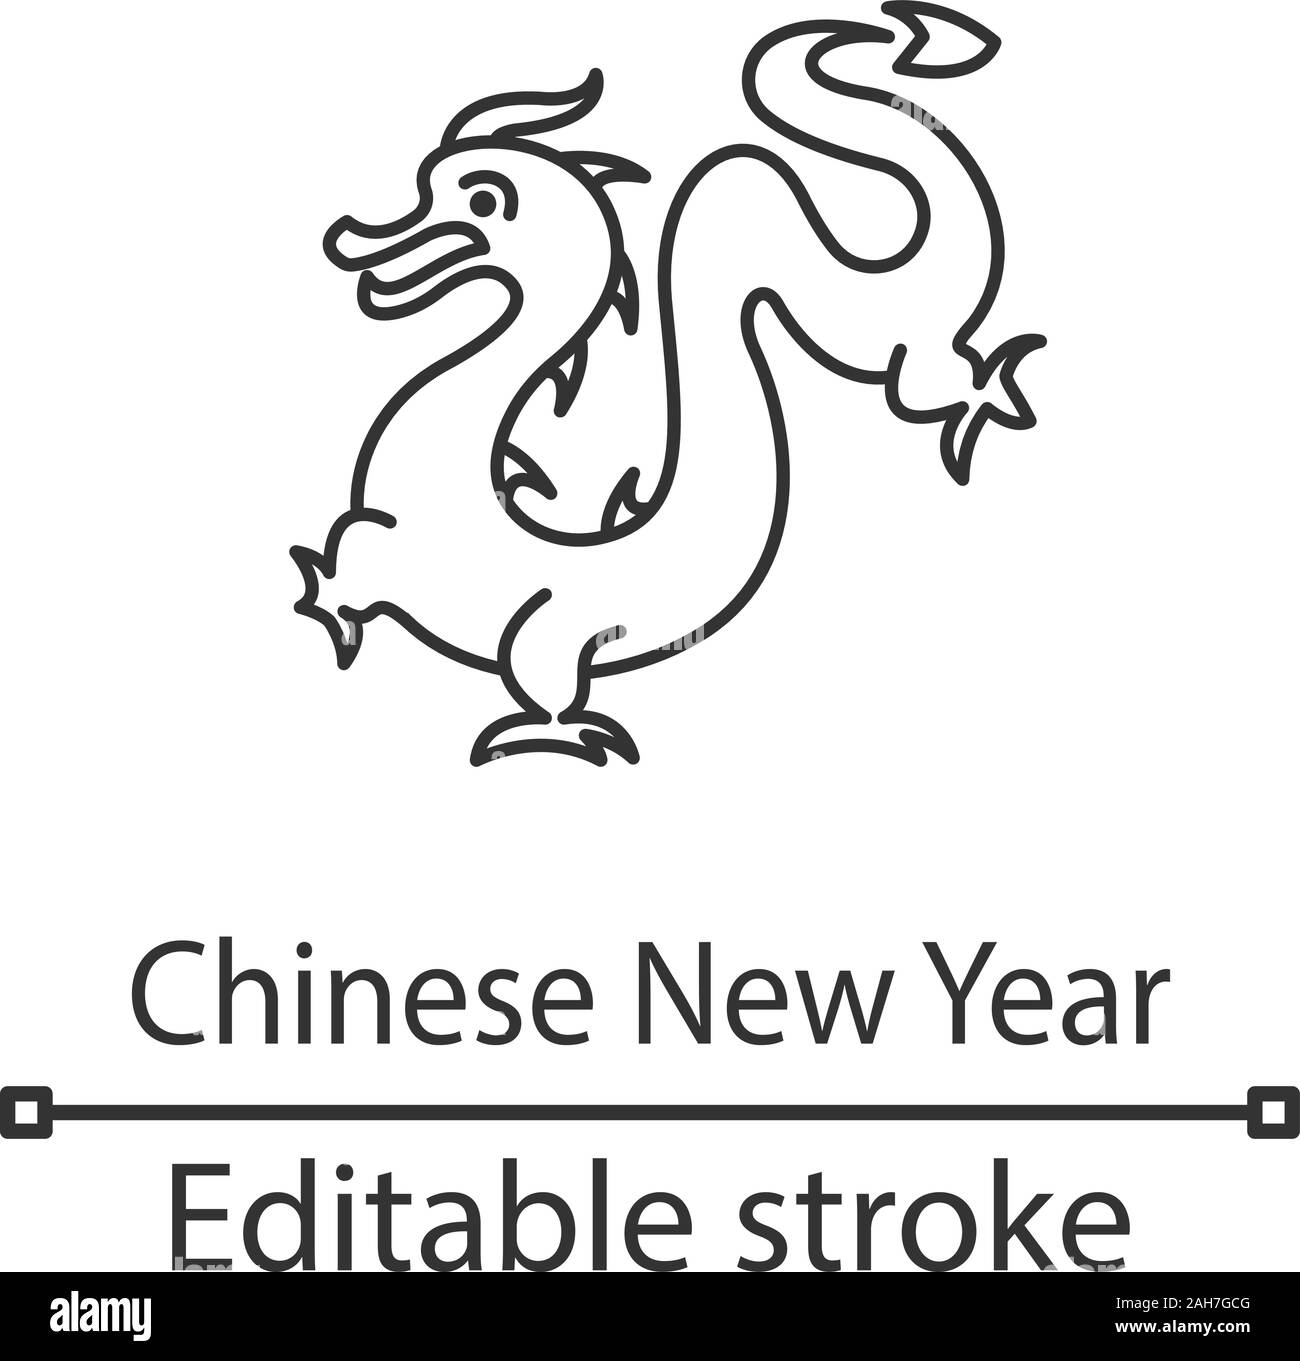 Chinese New Year linear icon. Thin line illustration. Chinese ...